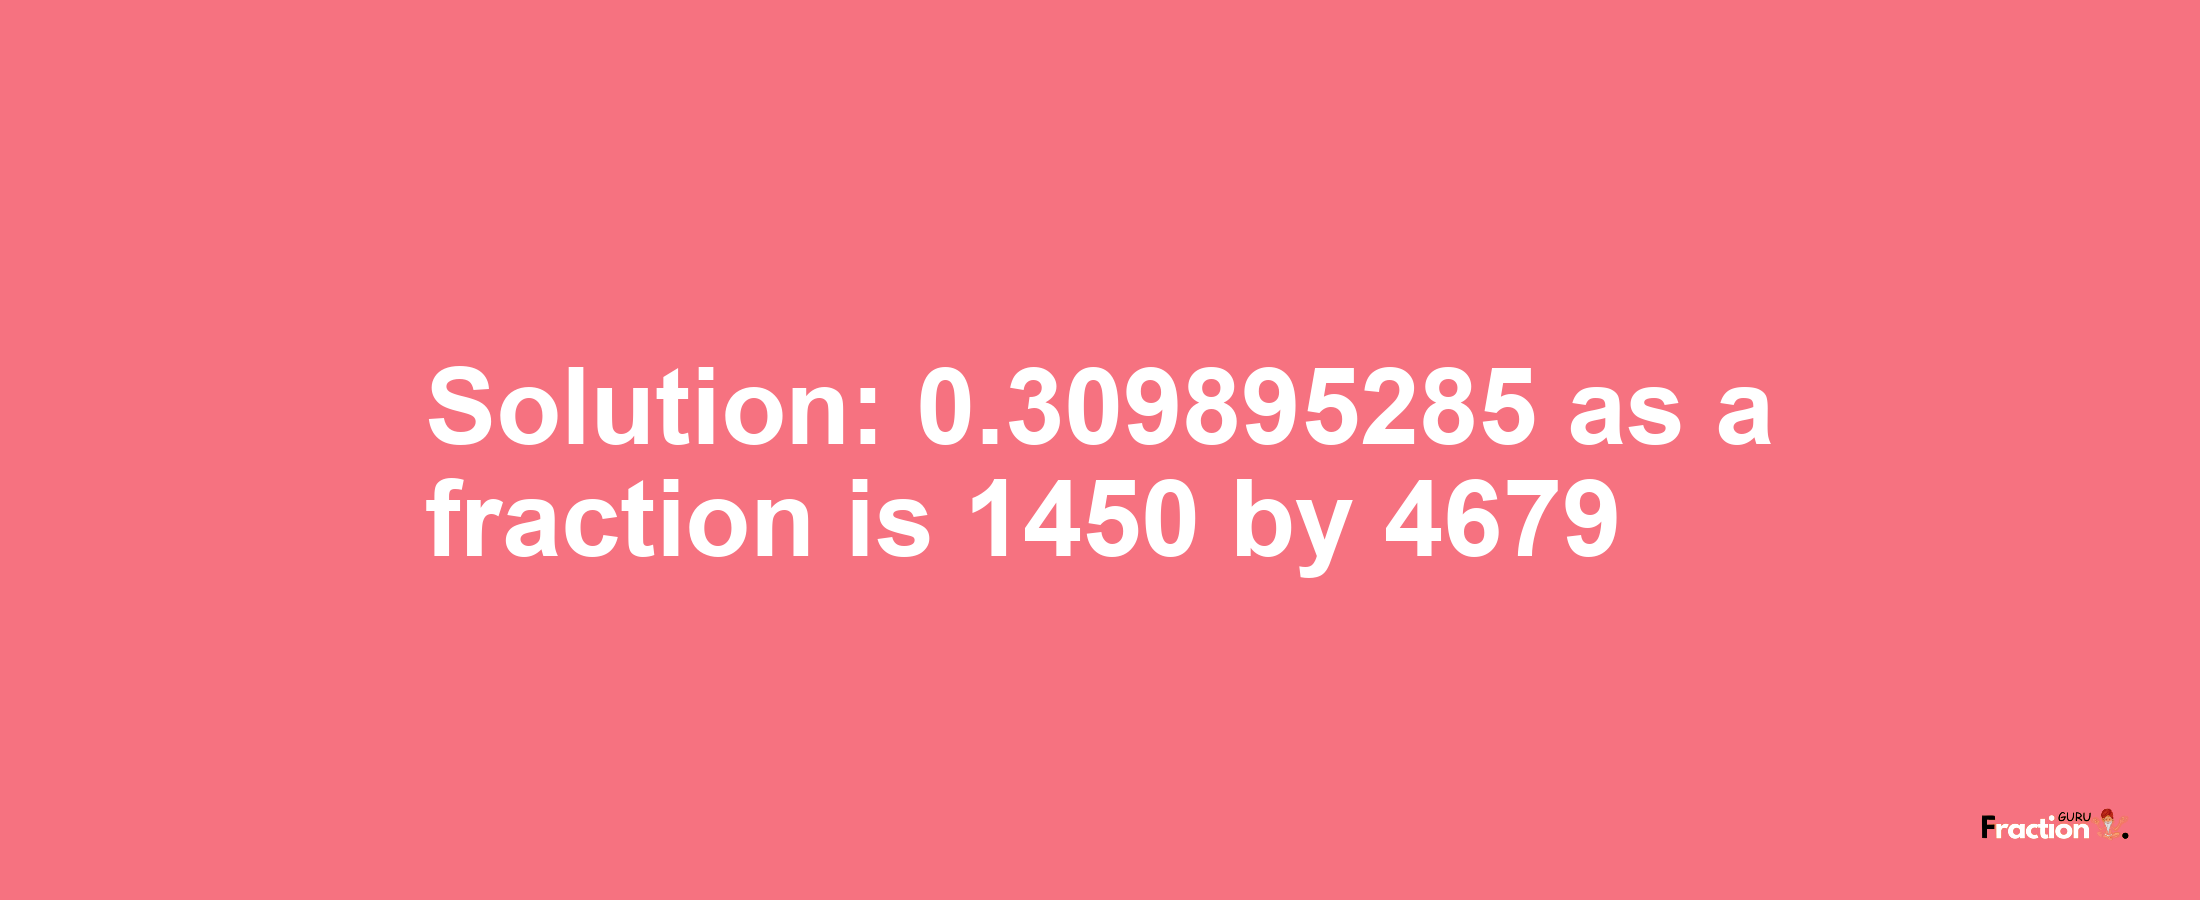 Solution:0.309895285 as a fraction is 1450/4679